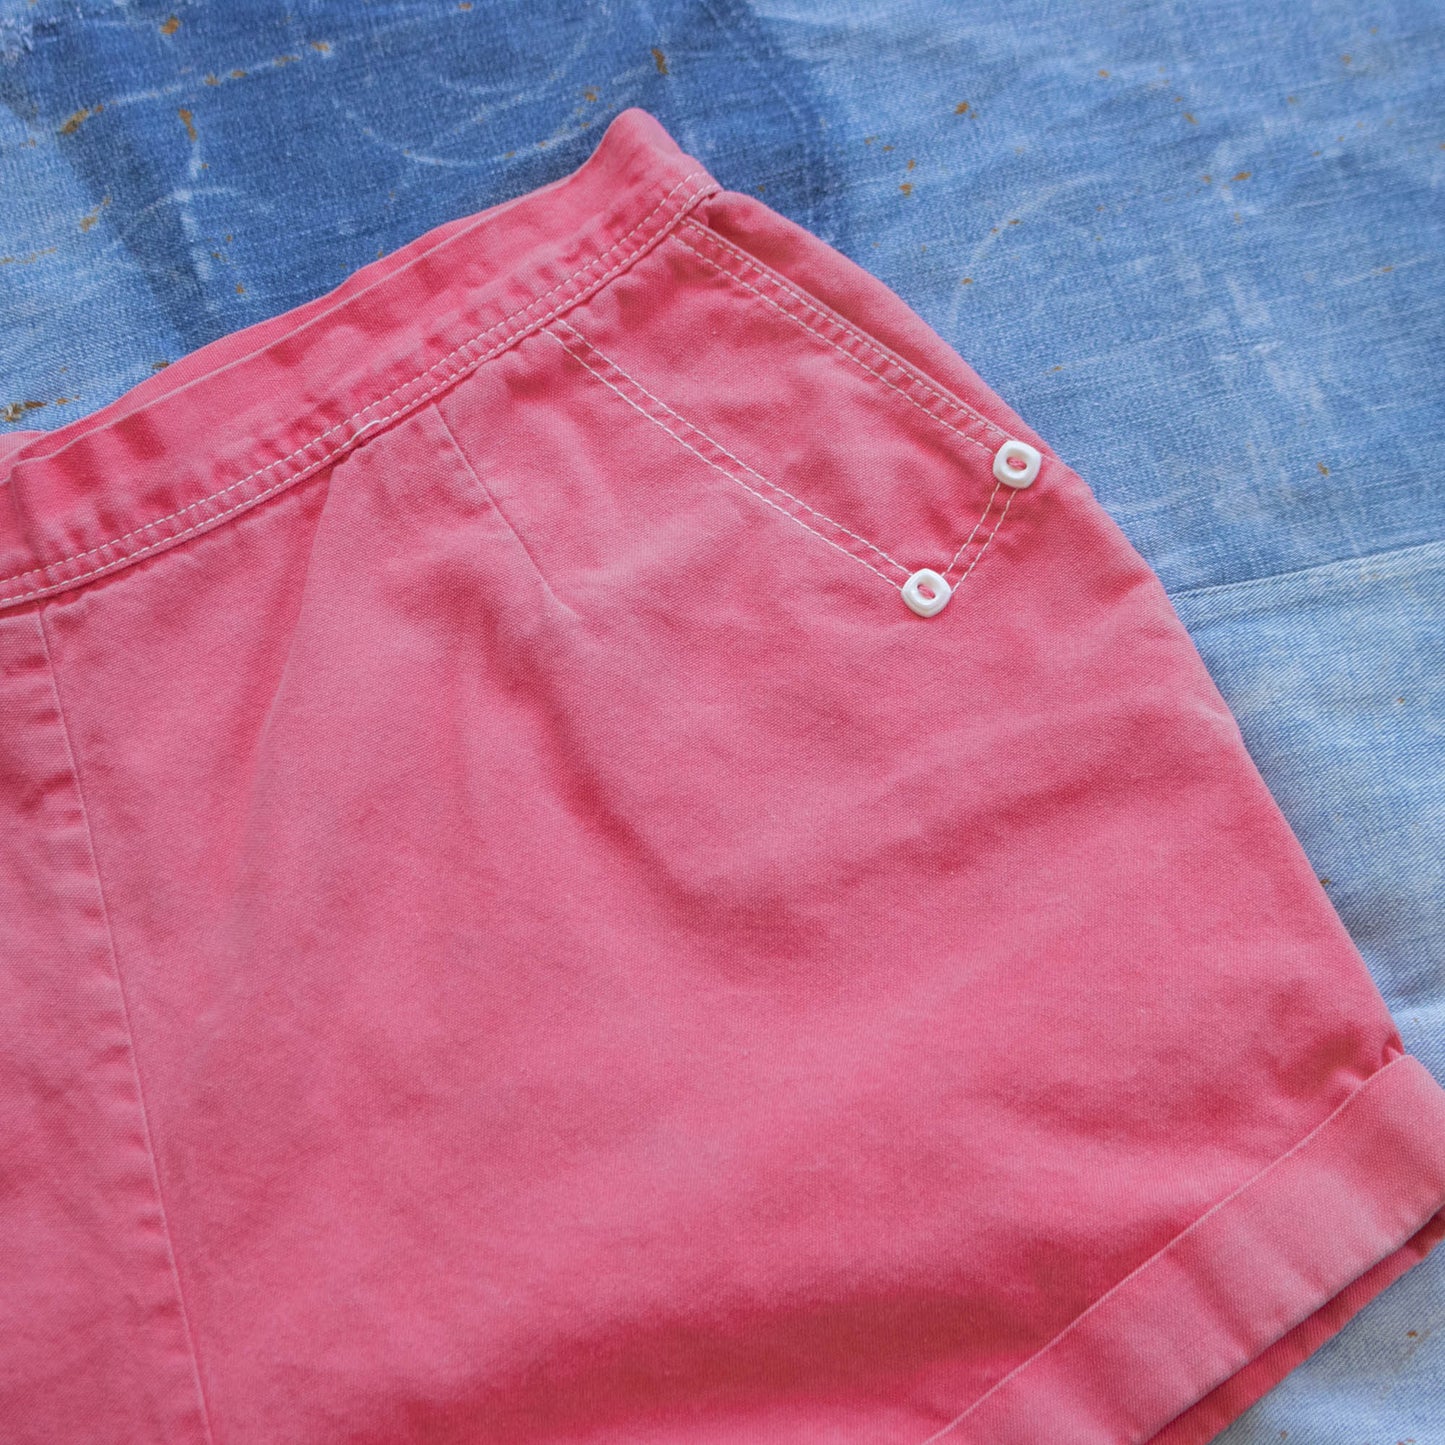 Vintage 40s Waist Size 32 Faded Red Shorts with Decorative Buttons